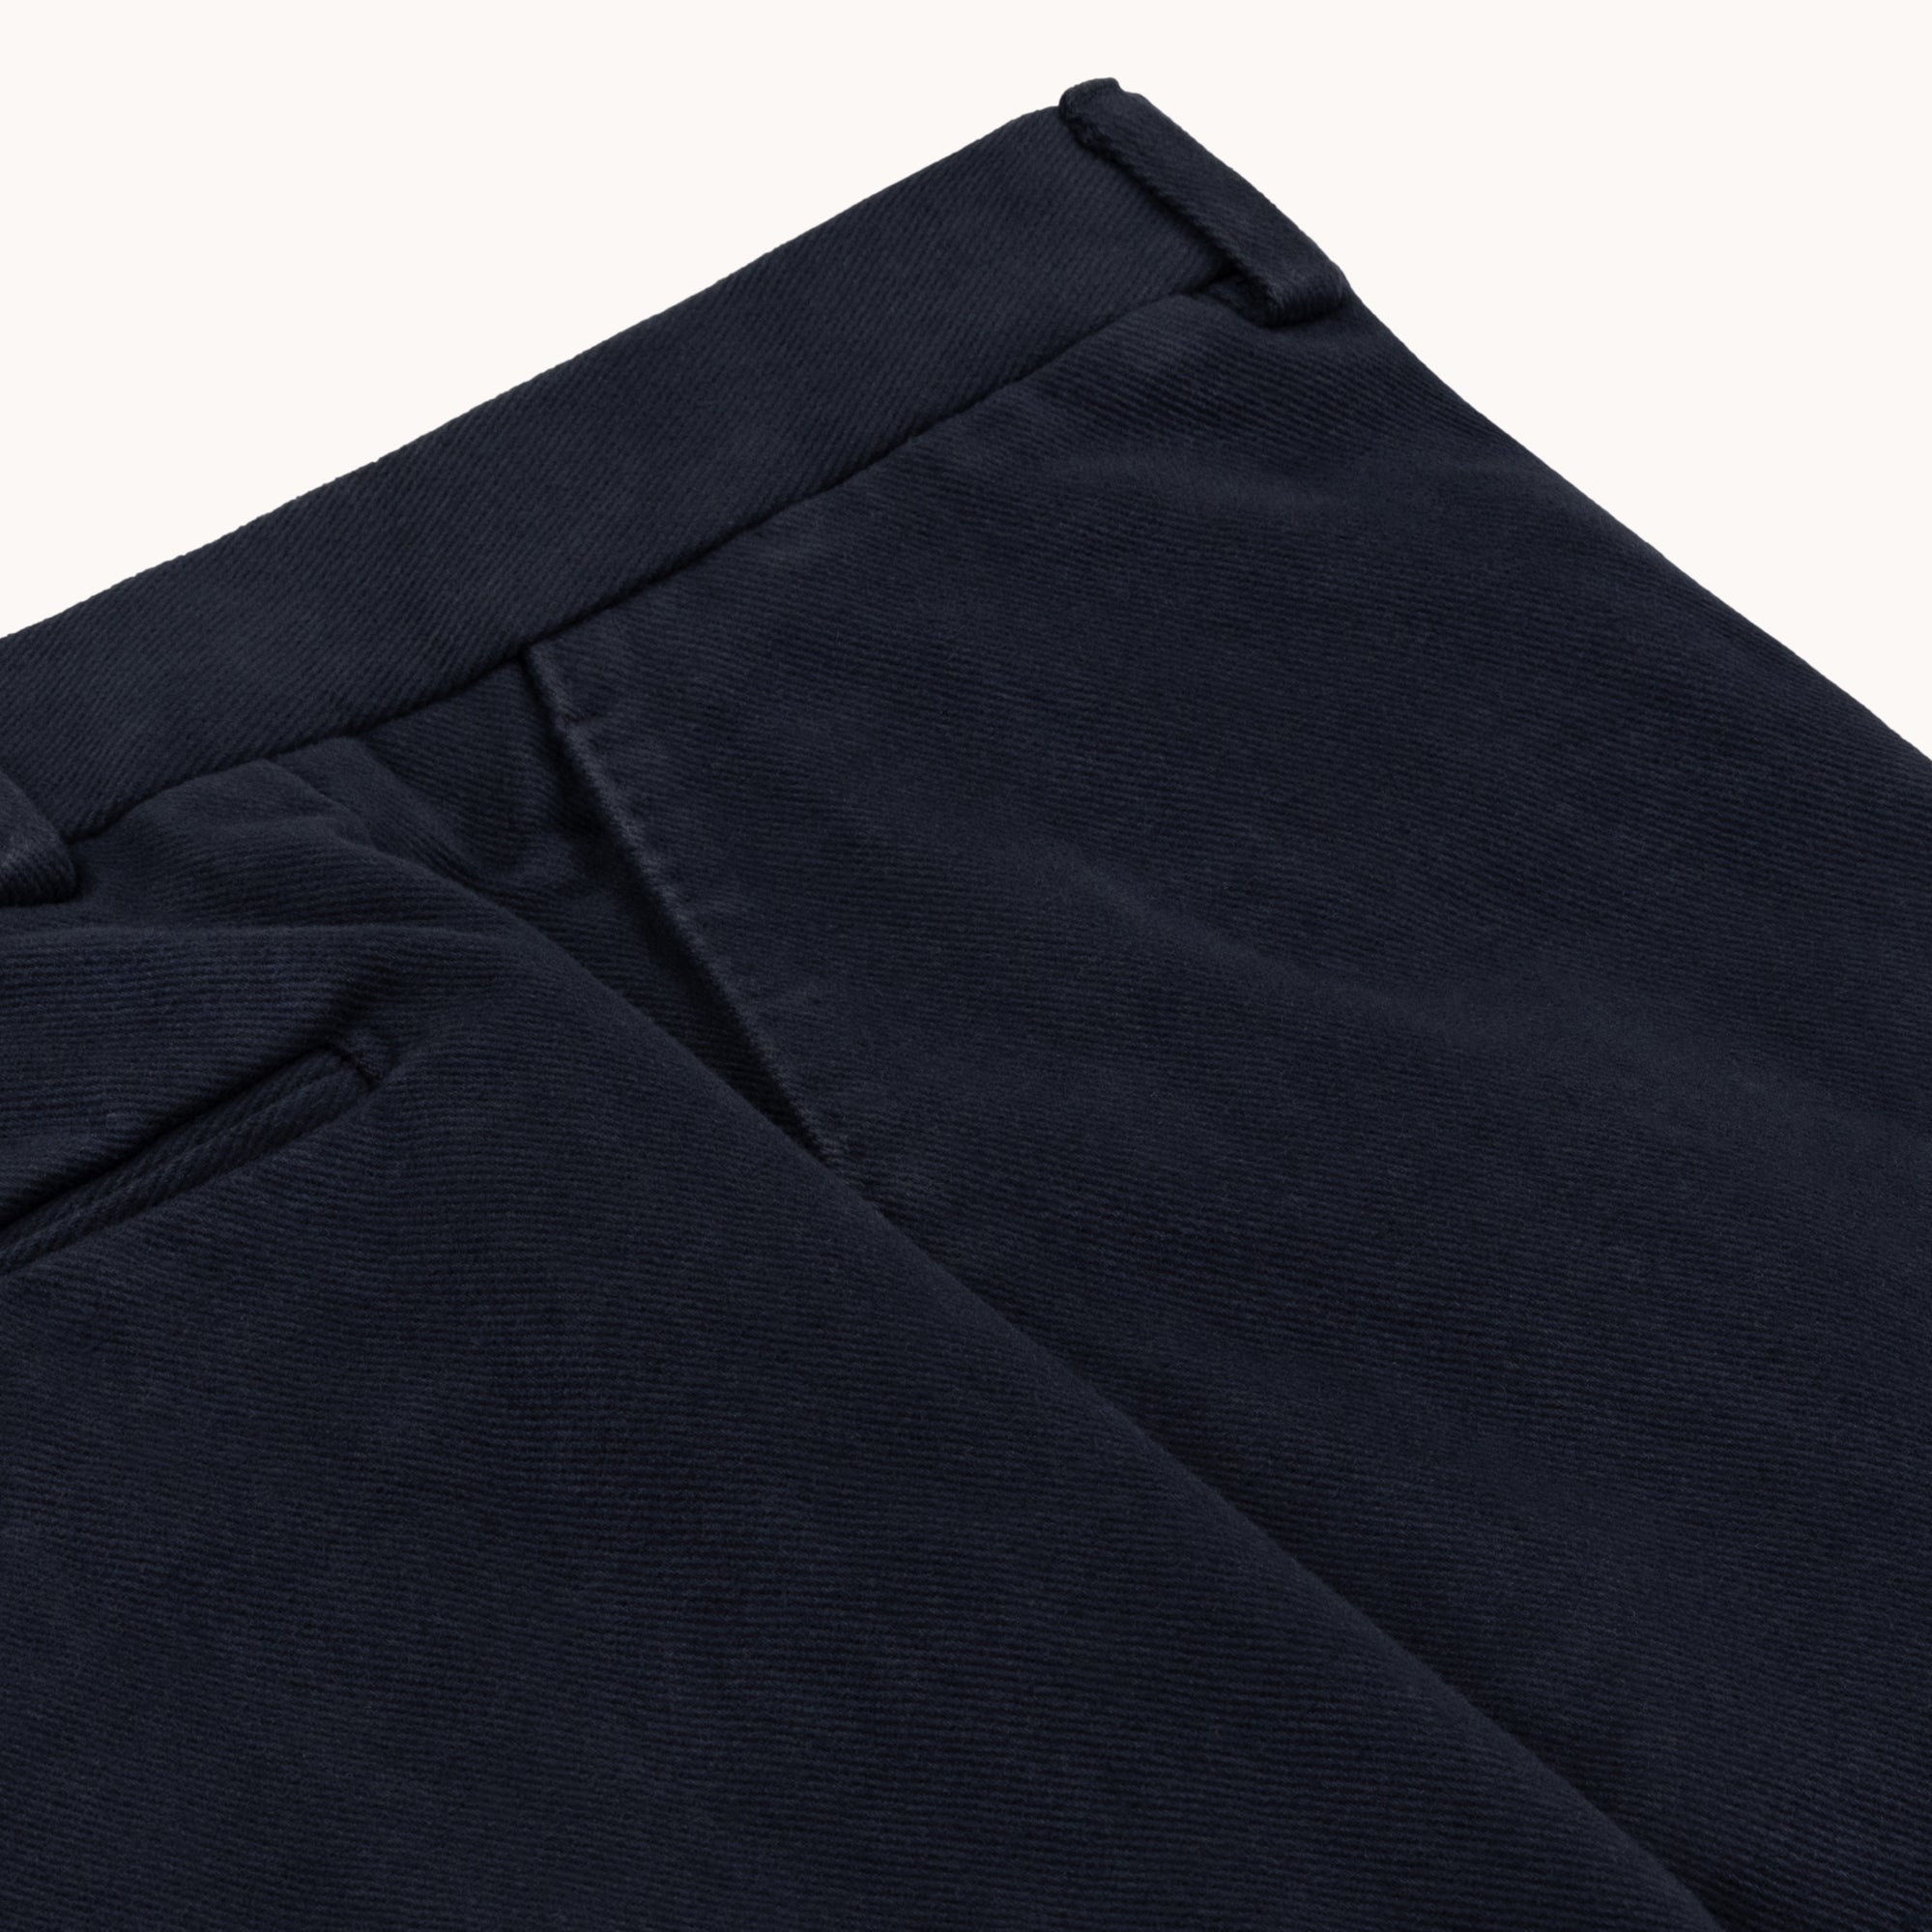 Garment Washed Flat Front Trouser - Navy Cotton Drill